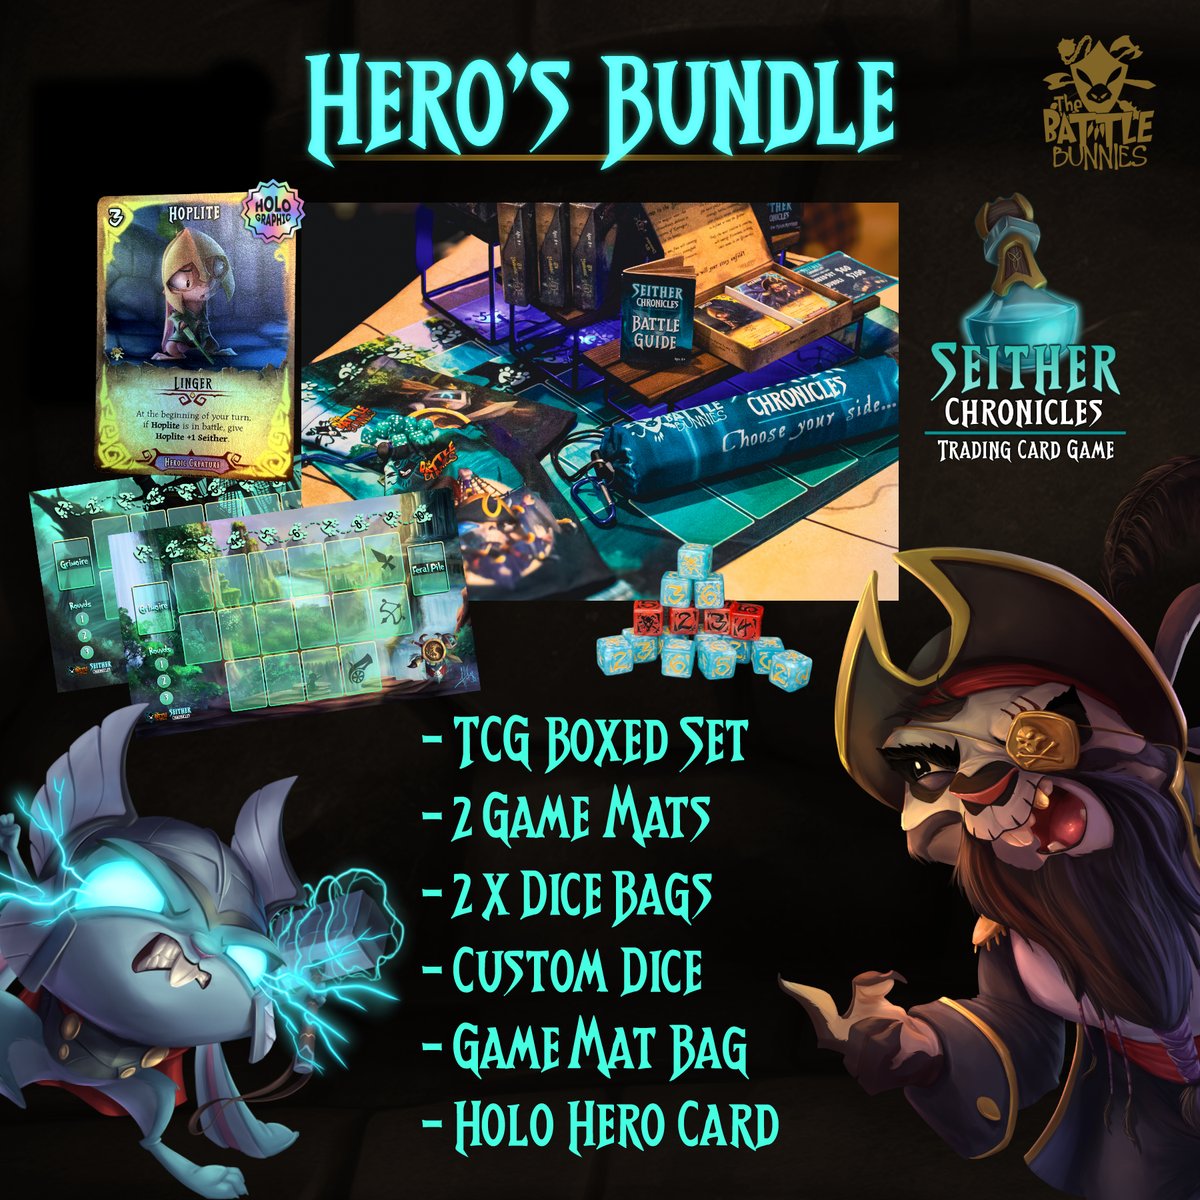 It's back! 🏆 The Hero's Bundle is Now Available; as well as Dice, Mats & Dice Bags a la carte 🎲 Join us in Discord Tonight for #Live TCG Play @ 8p ET 🥳 🐰Shop link: thebattlebunnies.io/shop #BattleBunnies #TCG #FluffleFam #GamingNews